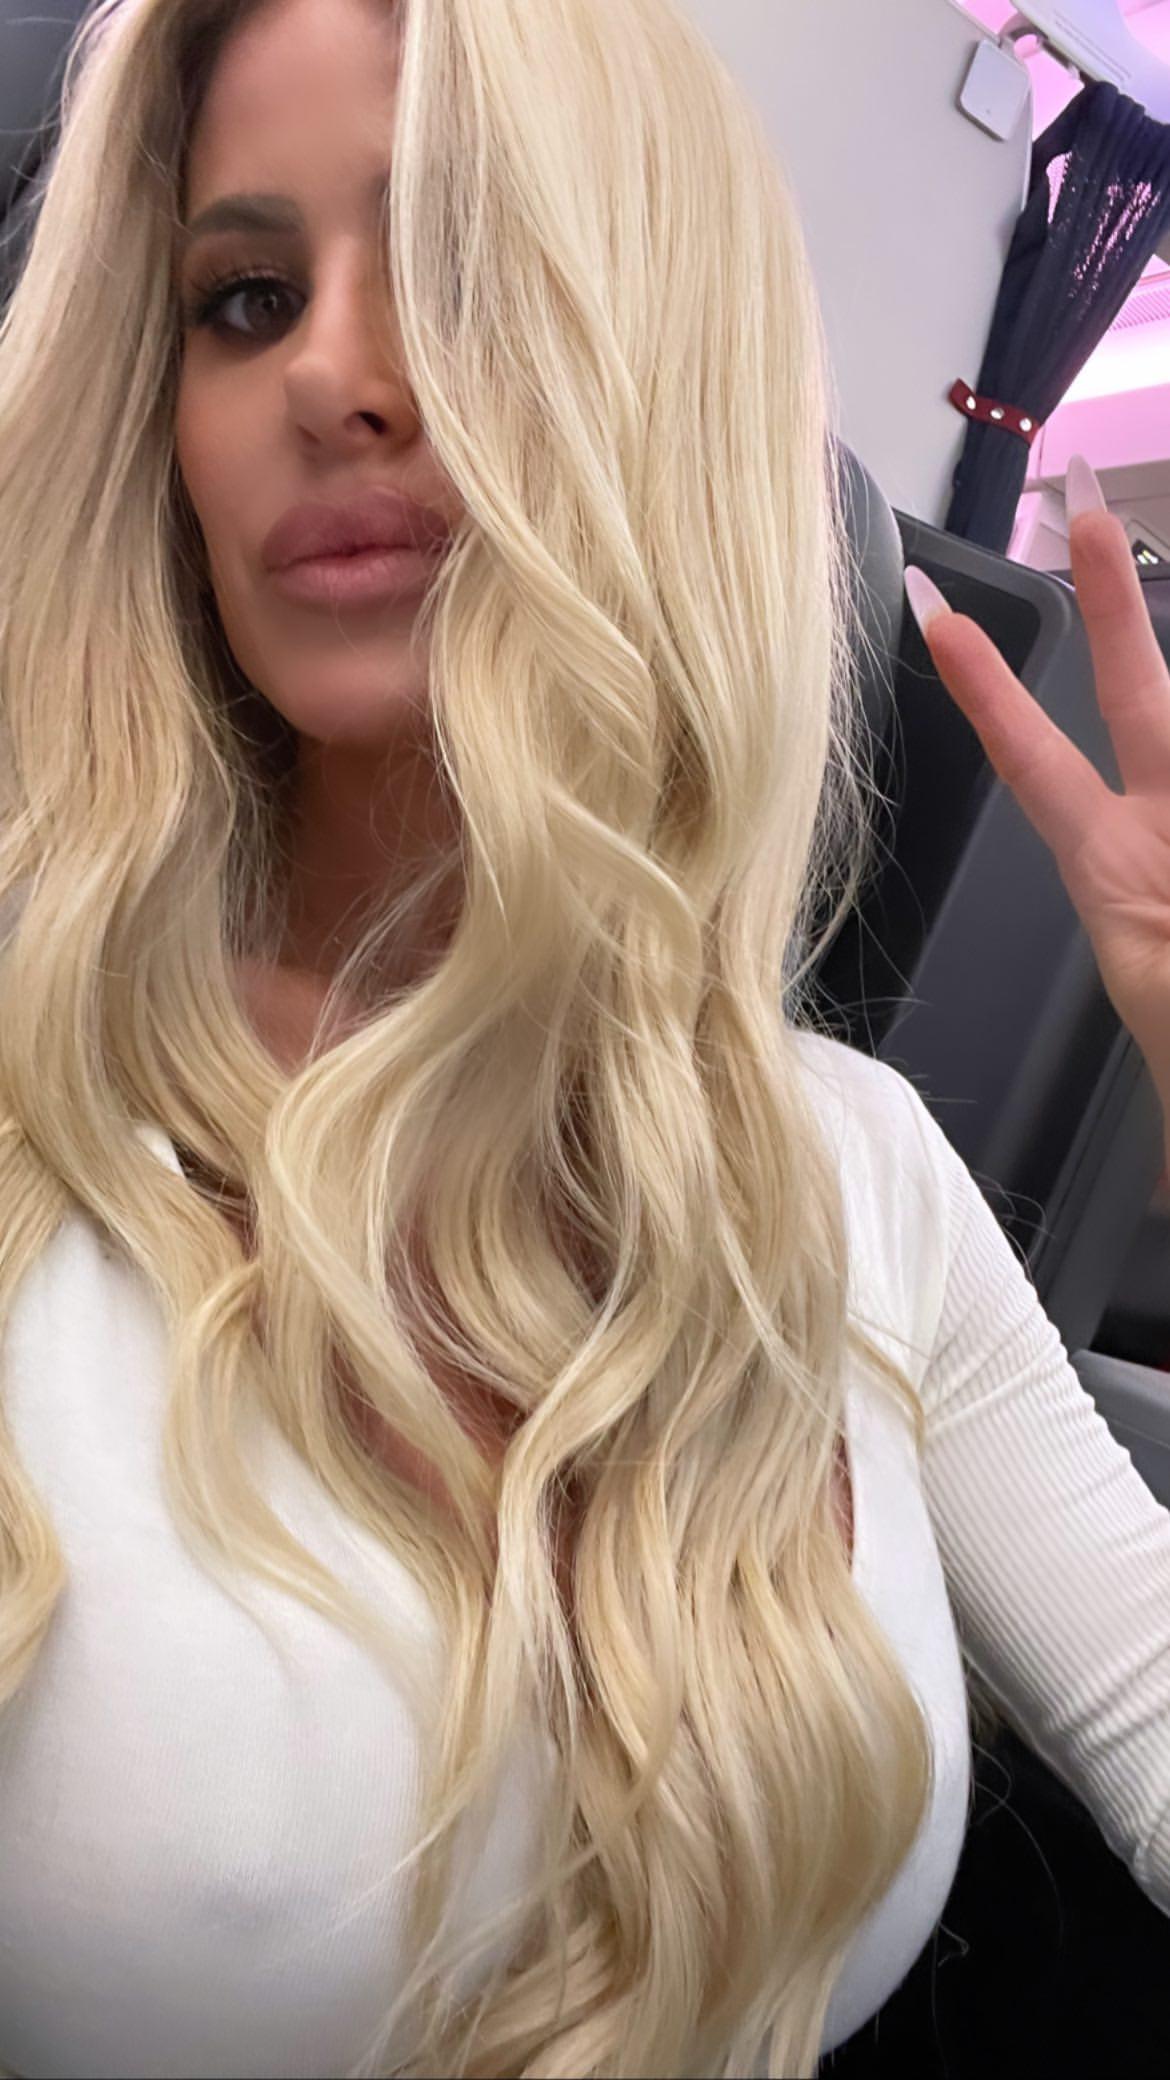 Kim Zolciak-Biermann Answers Fan Questions About Her Life Amid New Divorce Filing